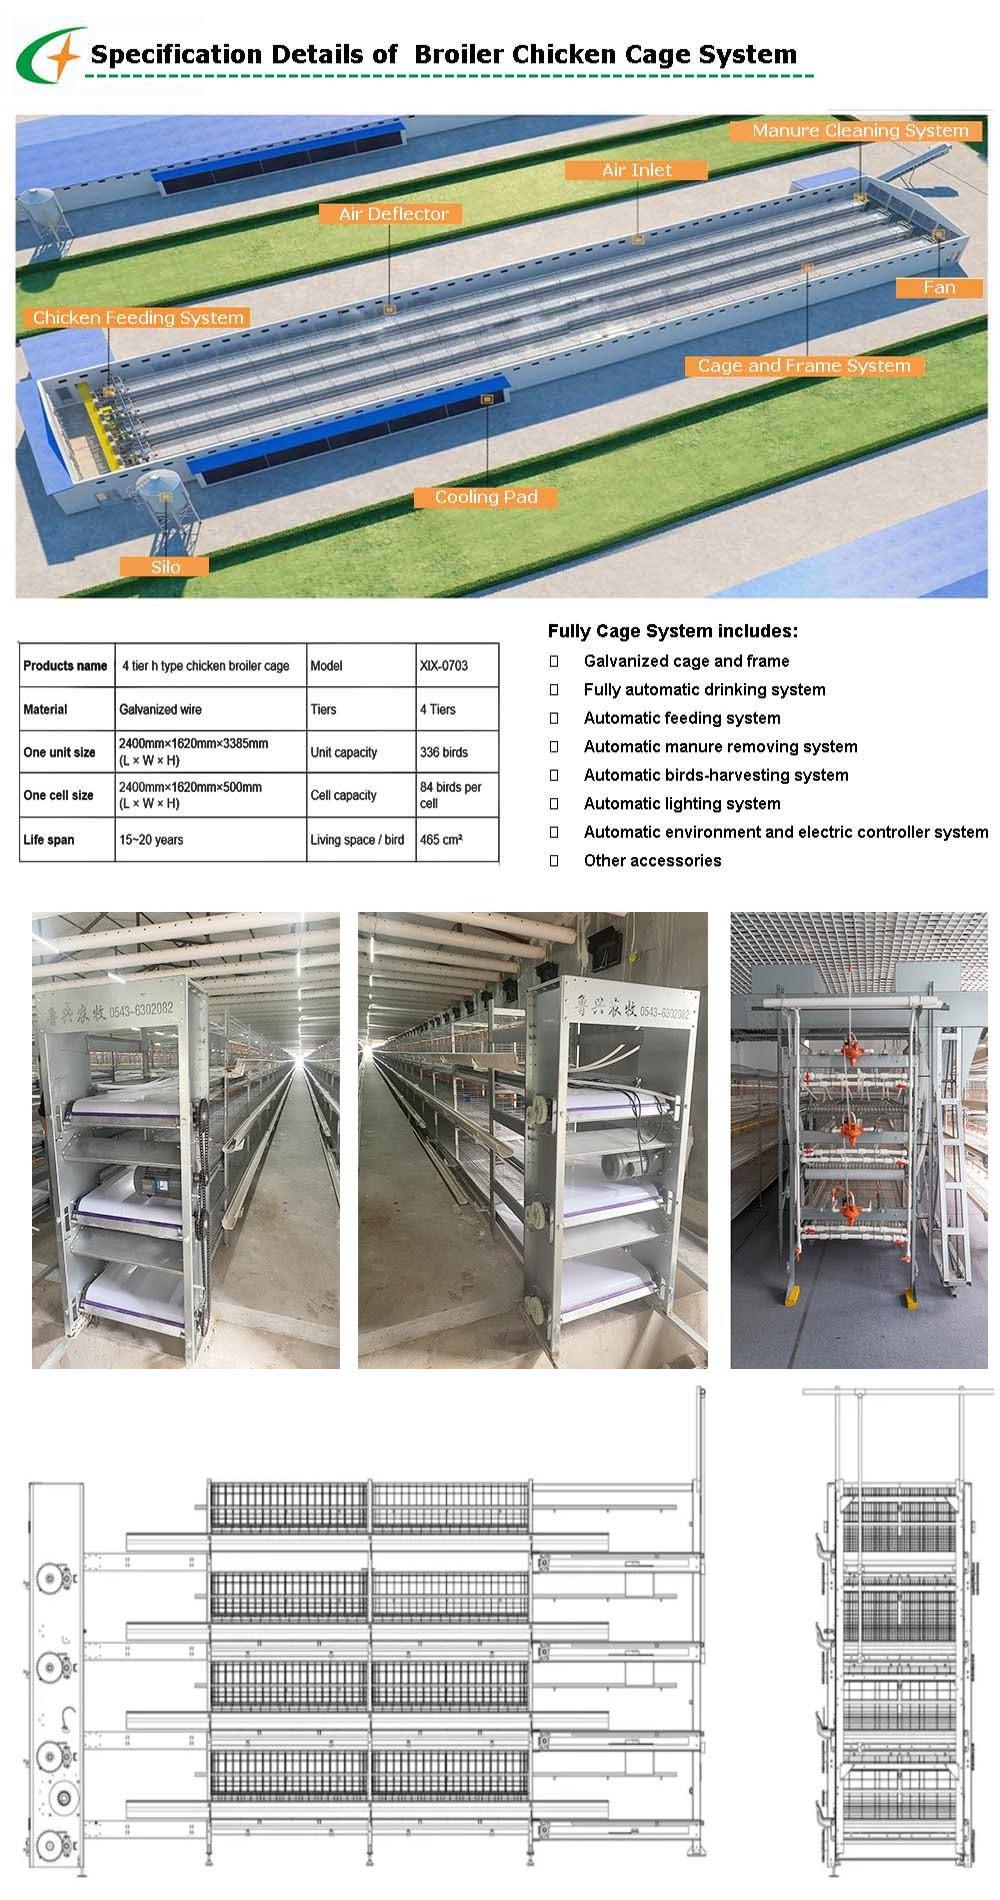 Chicken and Broiler Feeding System Use for Poultry Chicken Farm Equipment